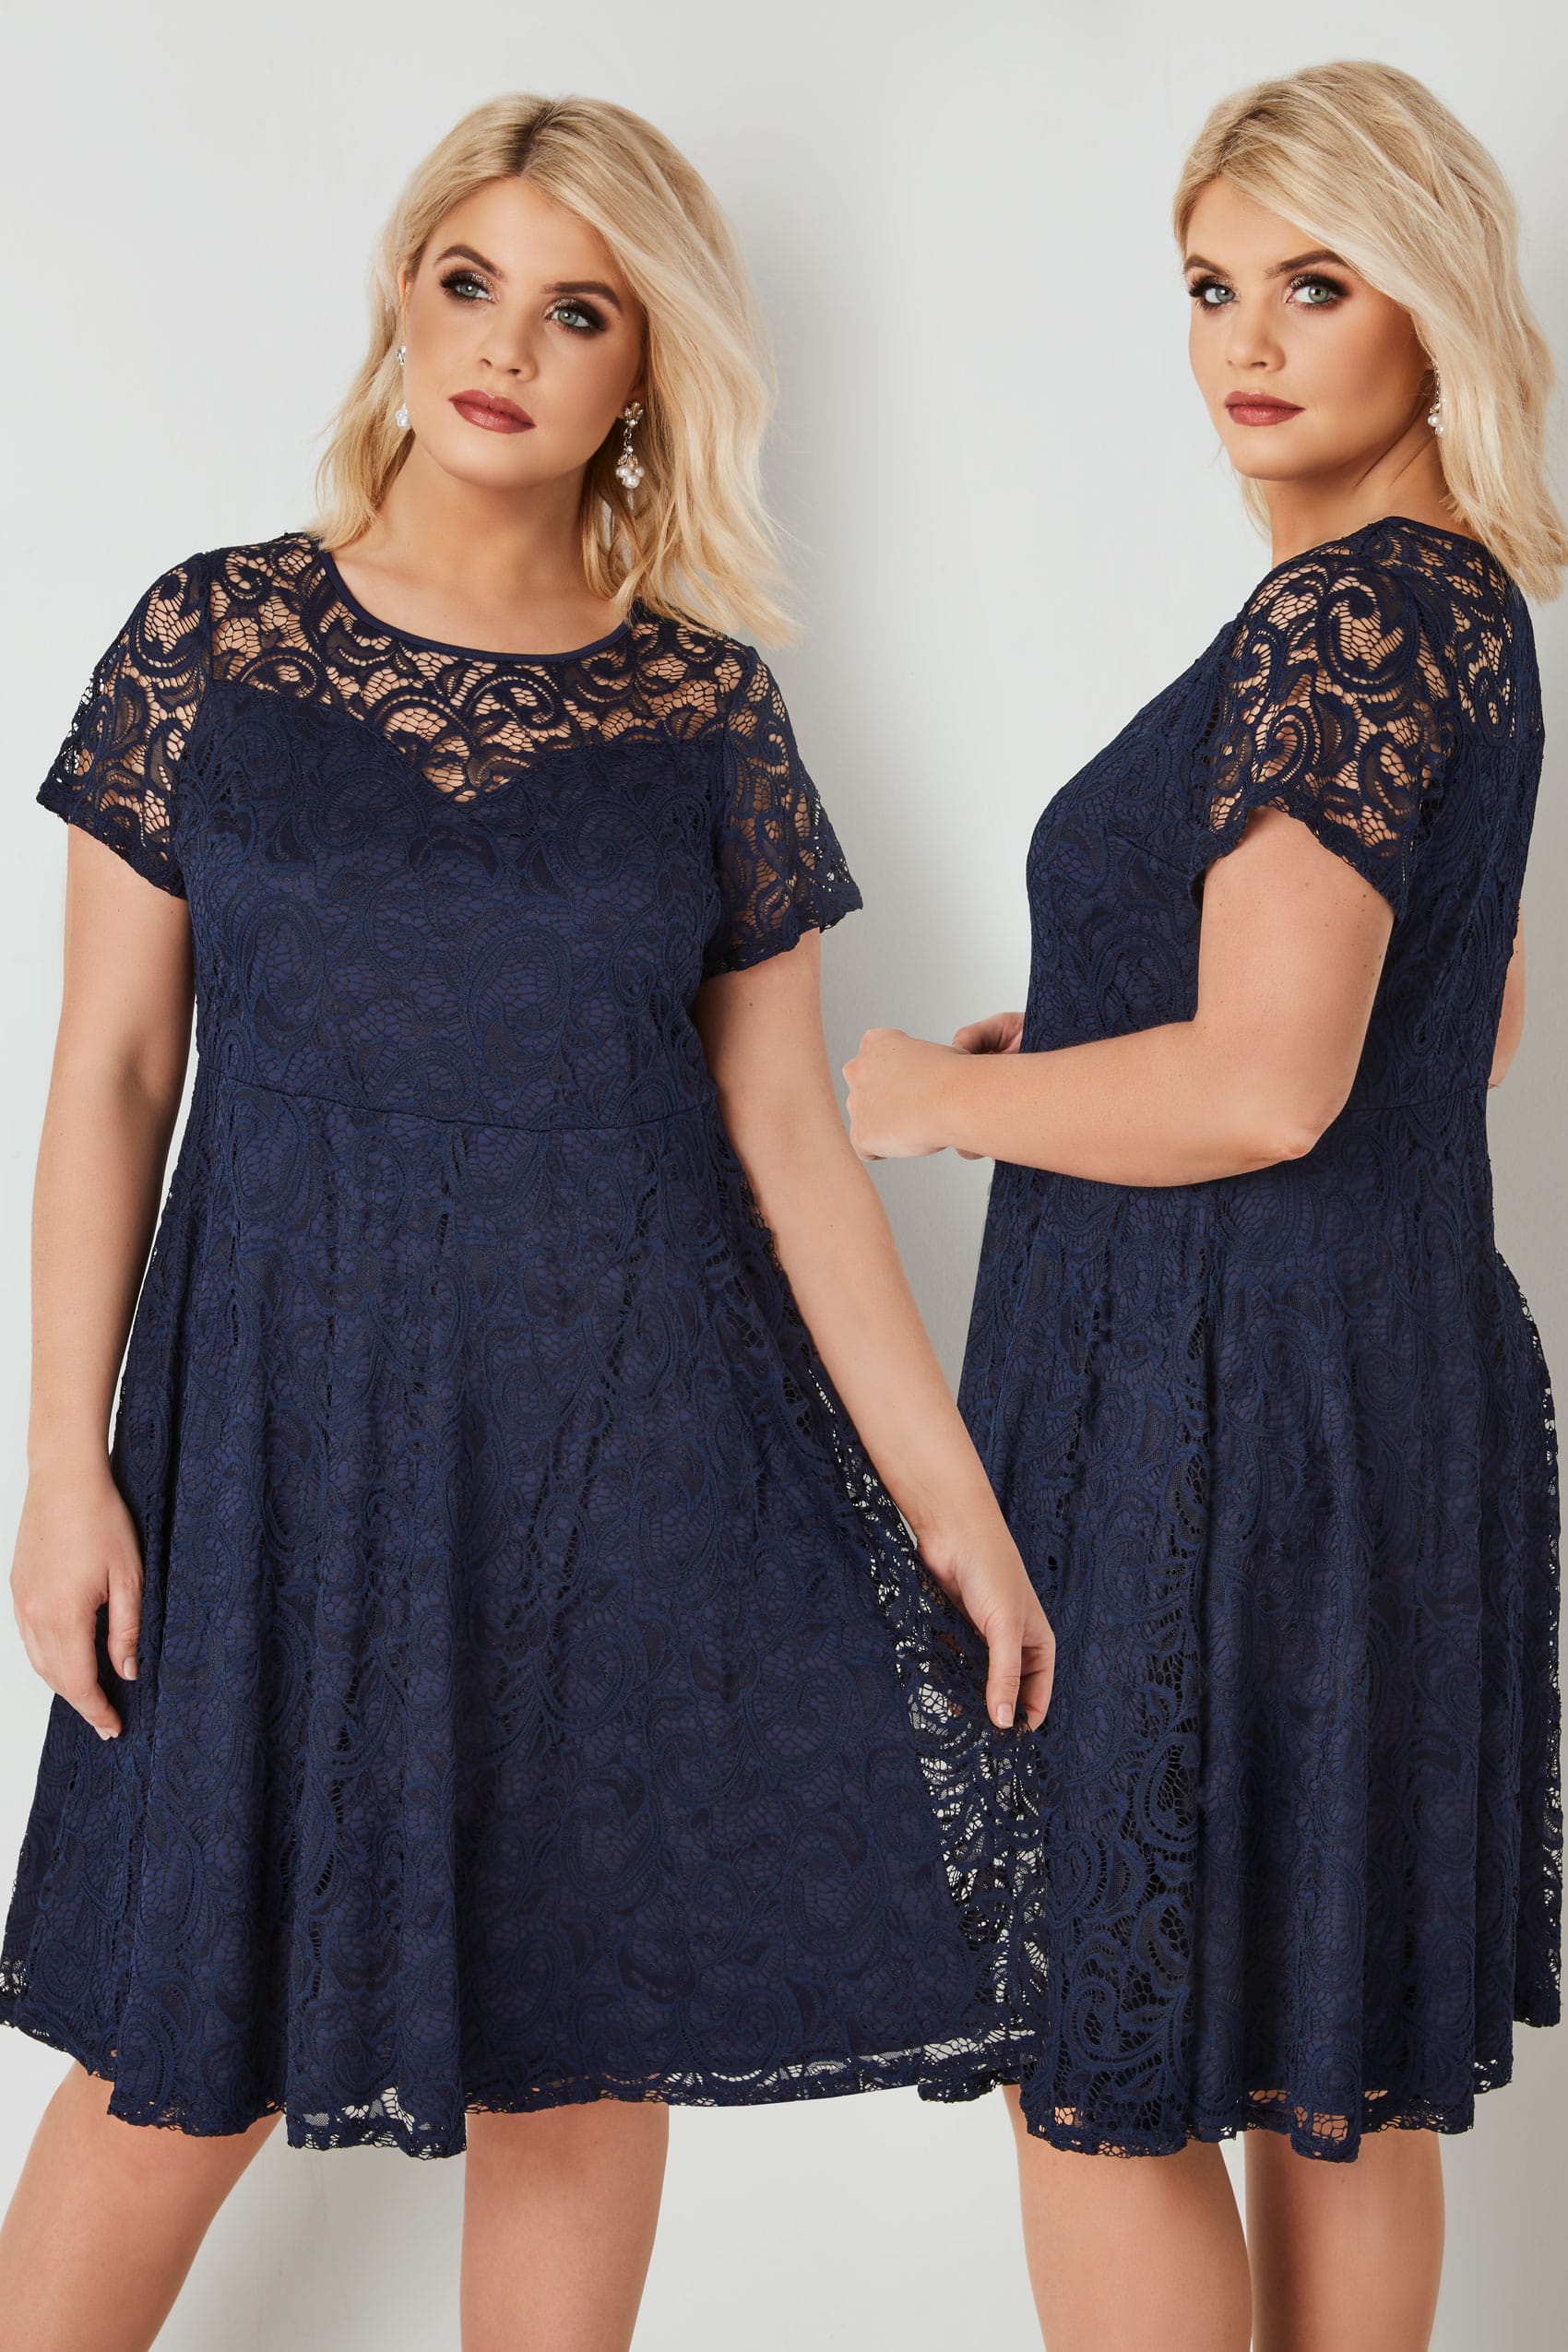 Navy Lace Skater Dress With Sweetheart Bust Plus Size 16 To 36